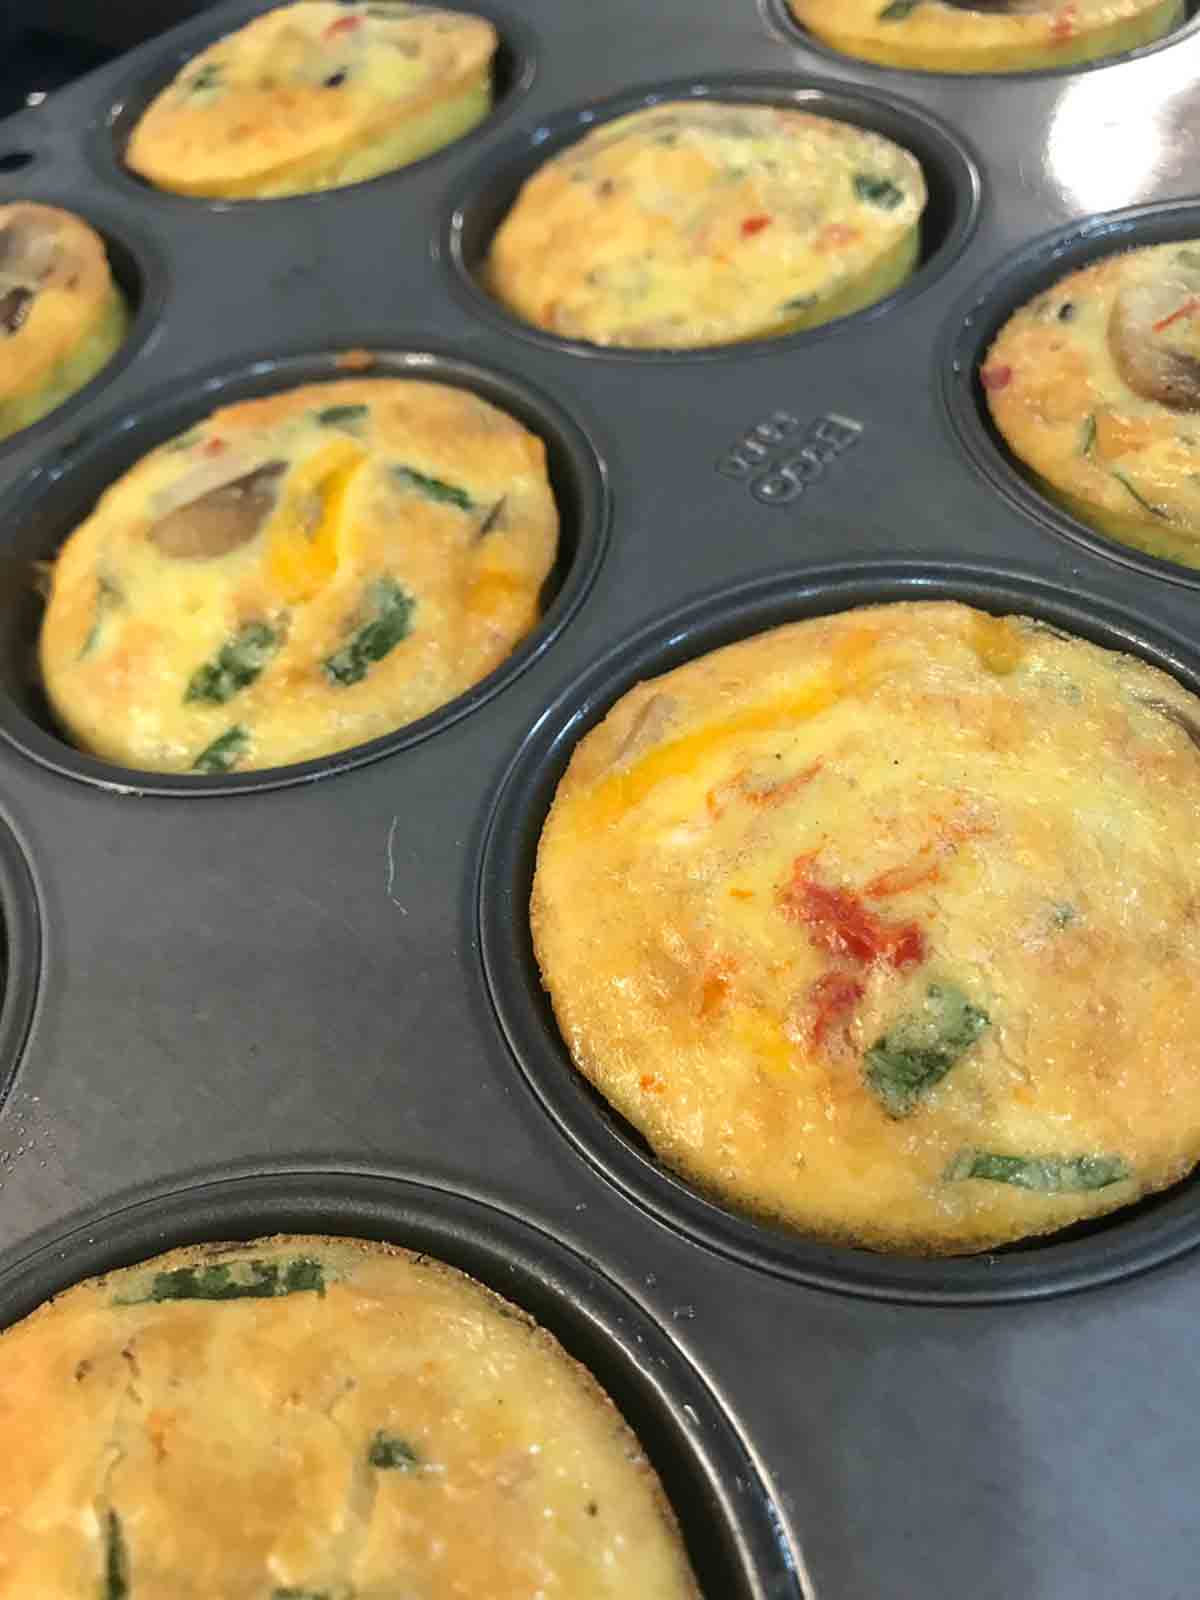 A muffin tin filled with baked egg bites.